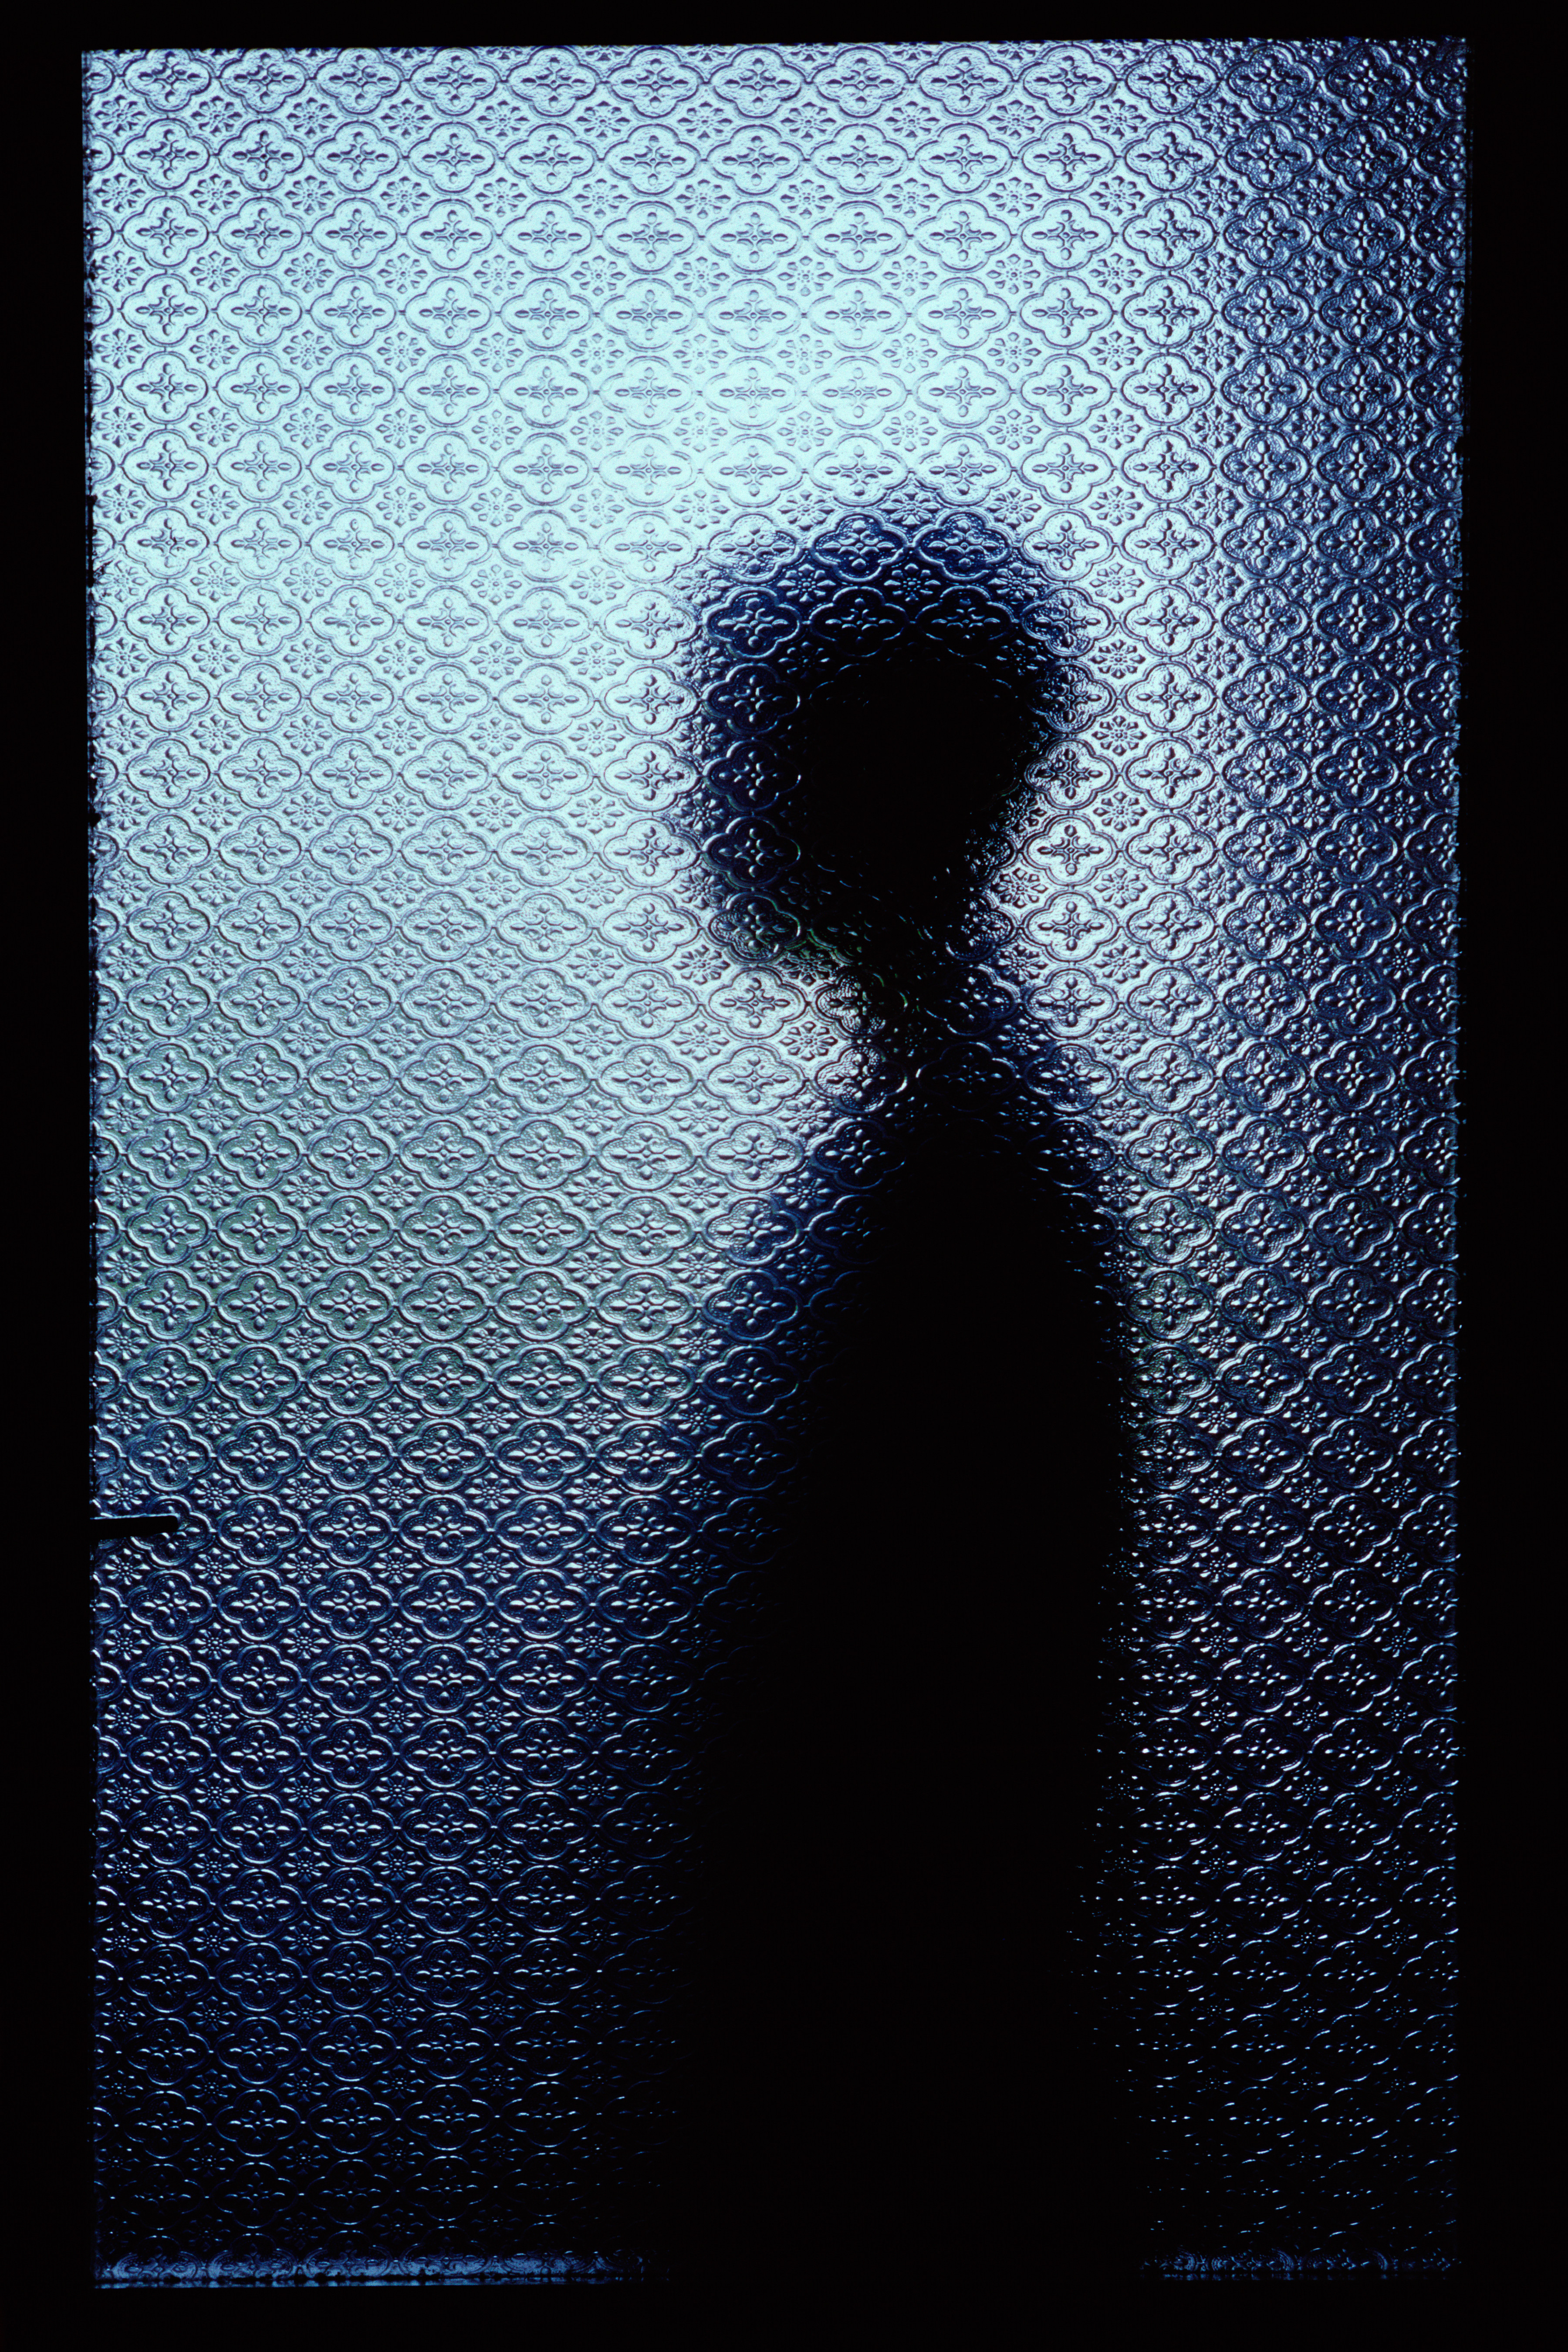 Silhouetted man through window